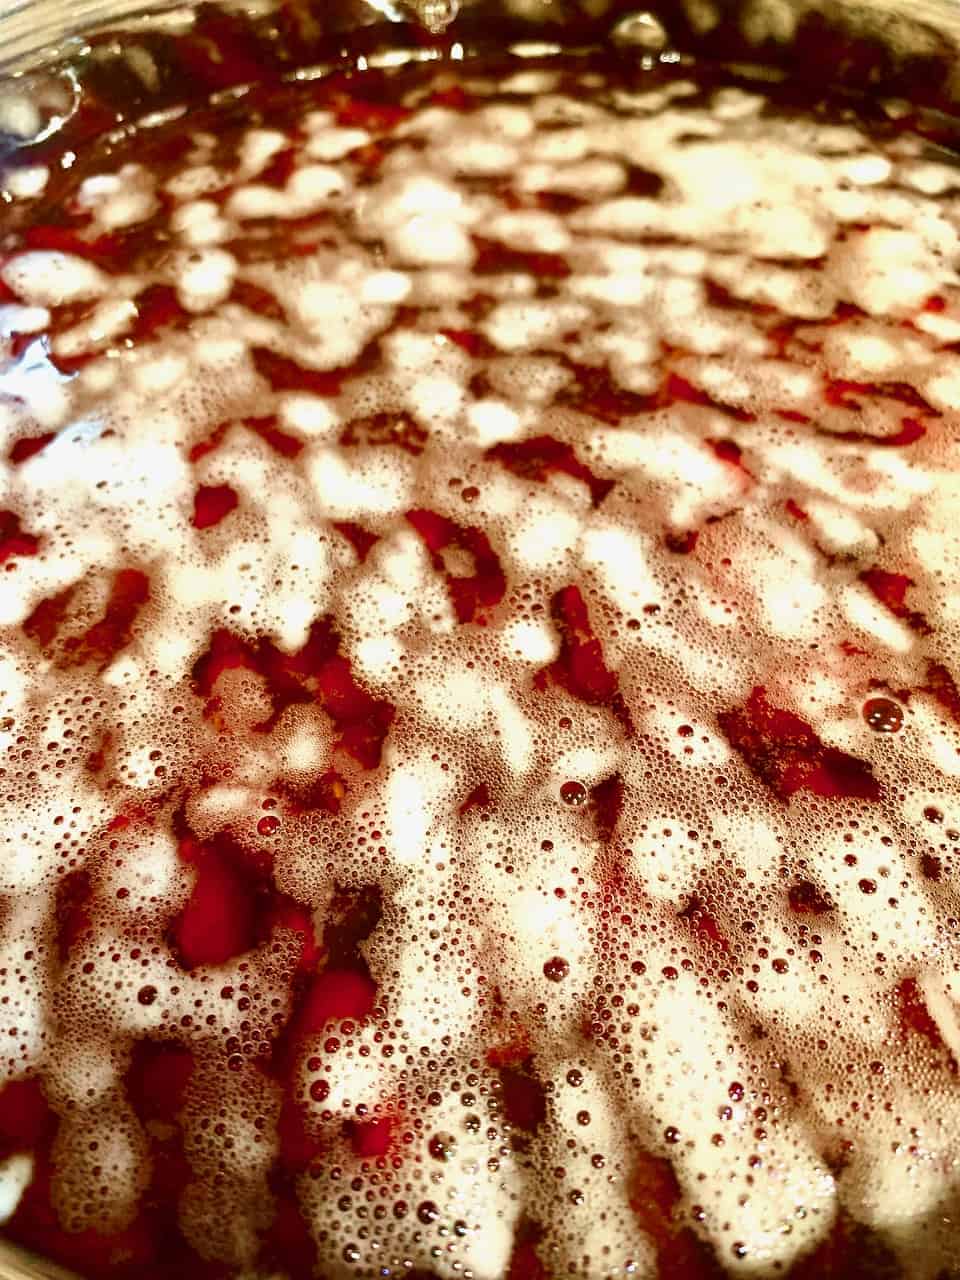 Foam forming while cooking Red Kidney Beans